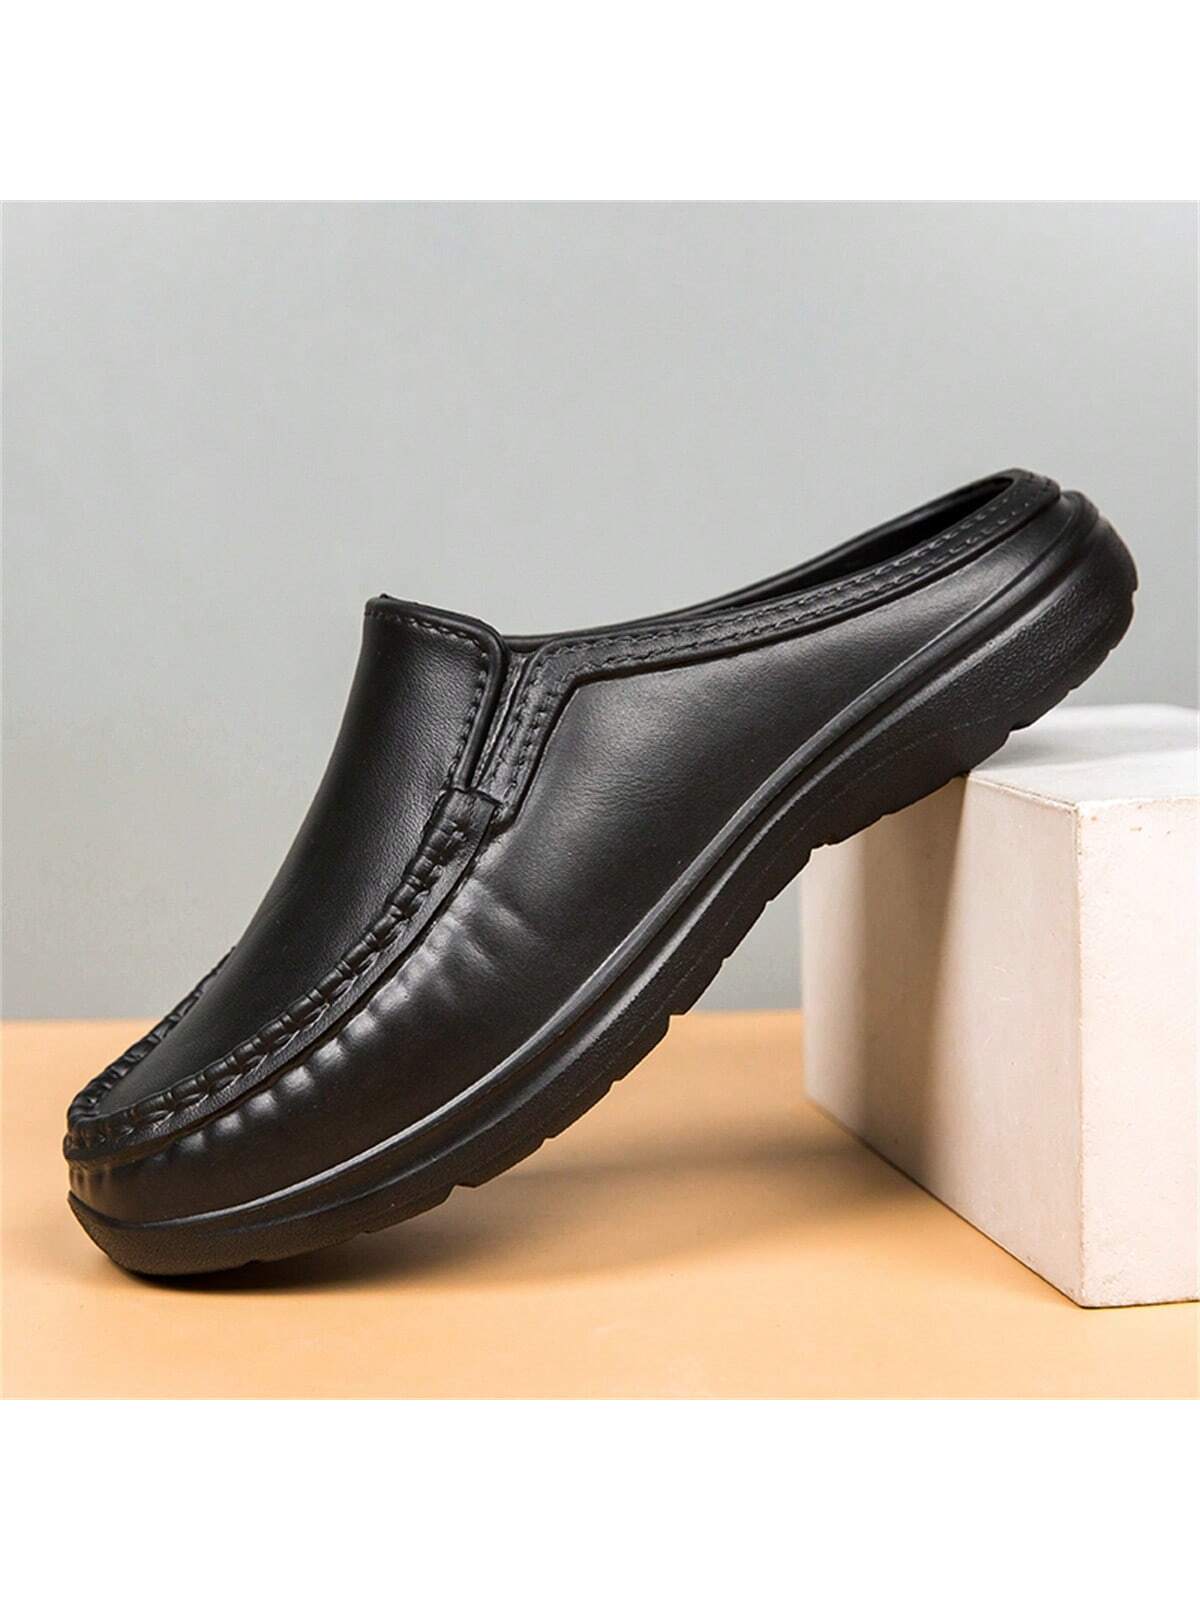 Simple Slip-on Men's Half Slippers With Non-slip Pu Leather Outsole, Suitable For Driving And Chef Work